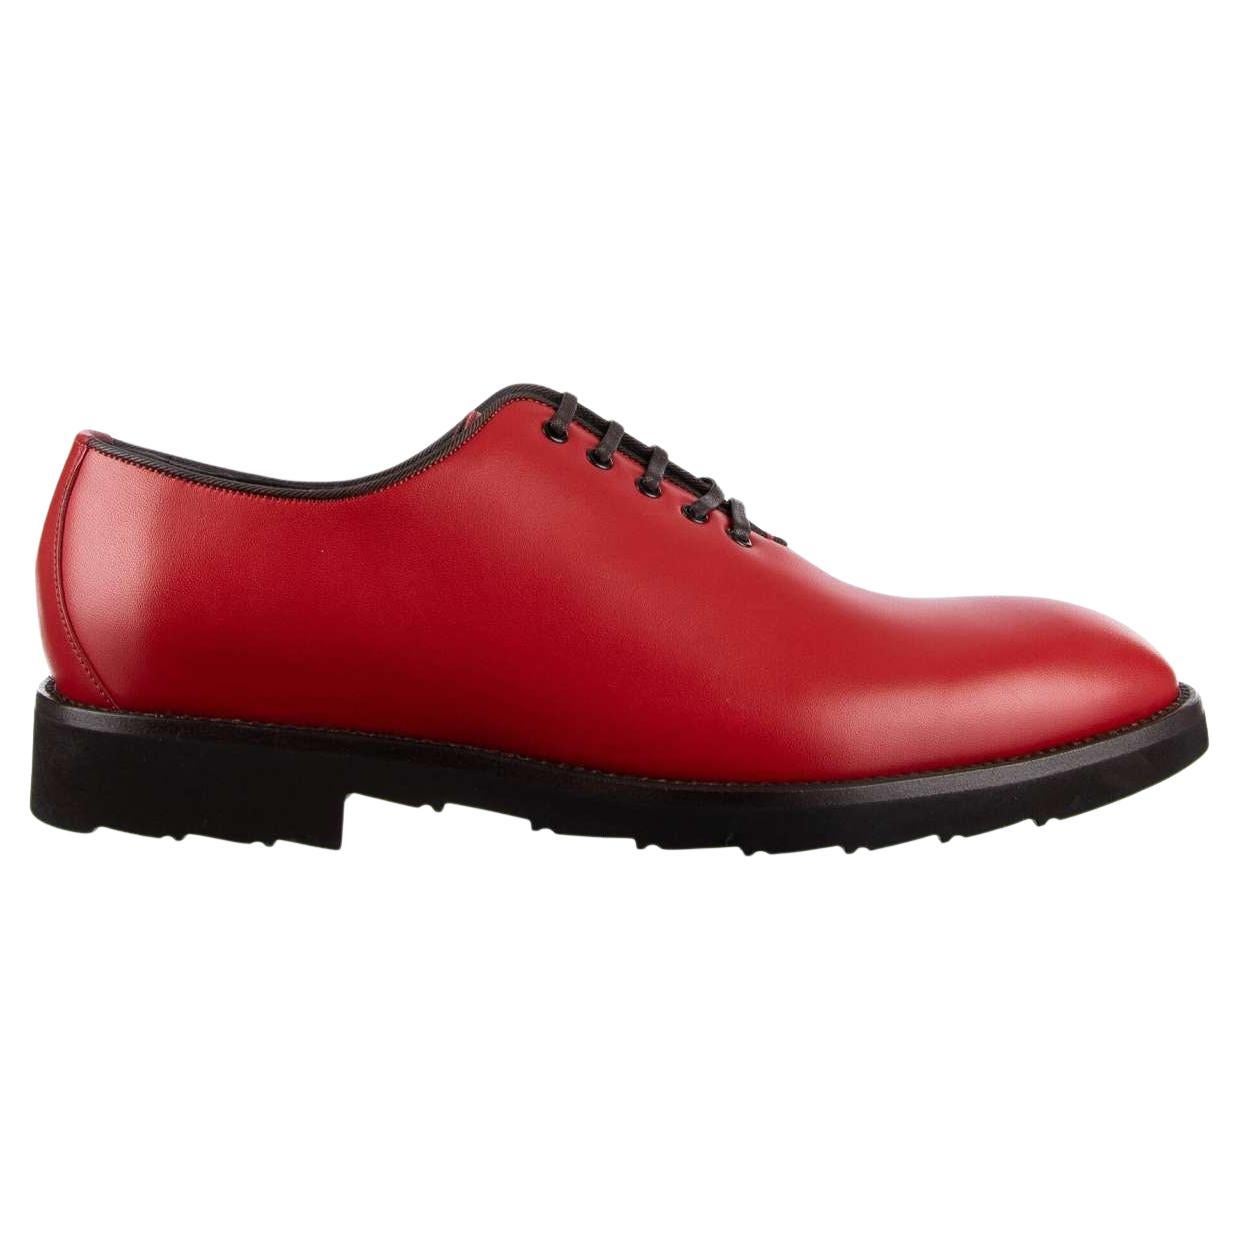 Dolce & Gabbana - Leather Oxford Shoes SICILIA Red EUR 43 For Sale